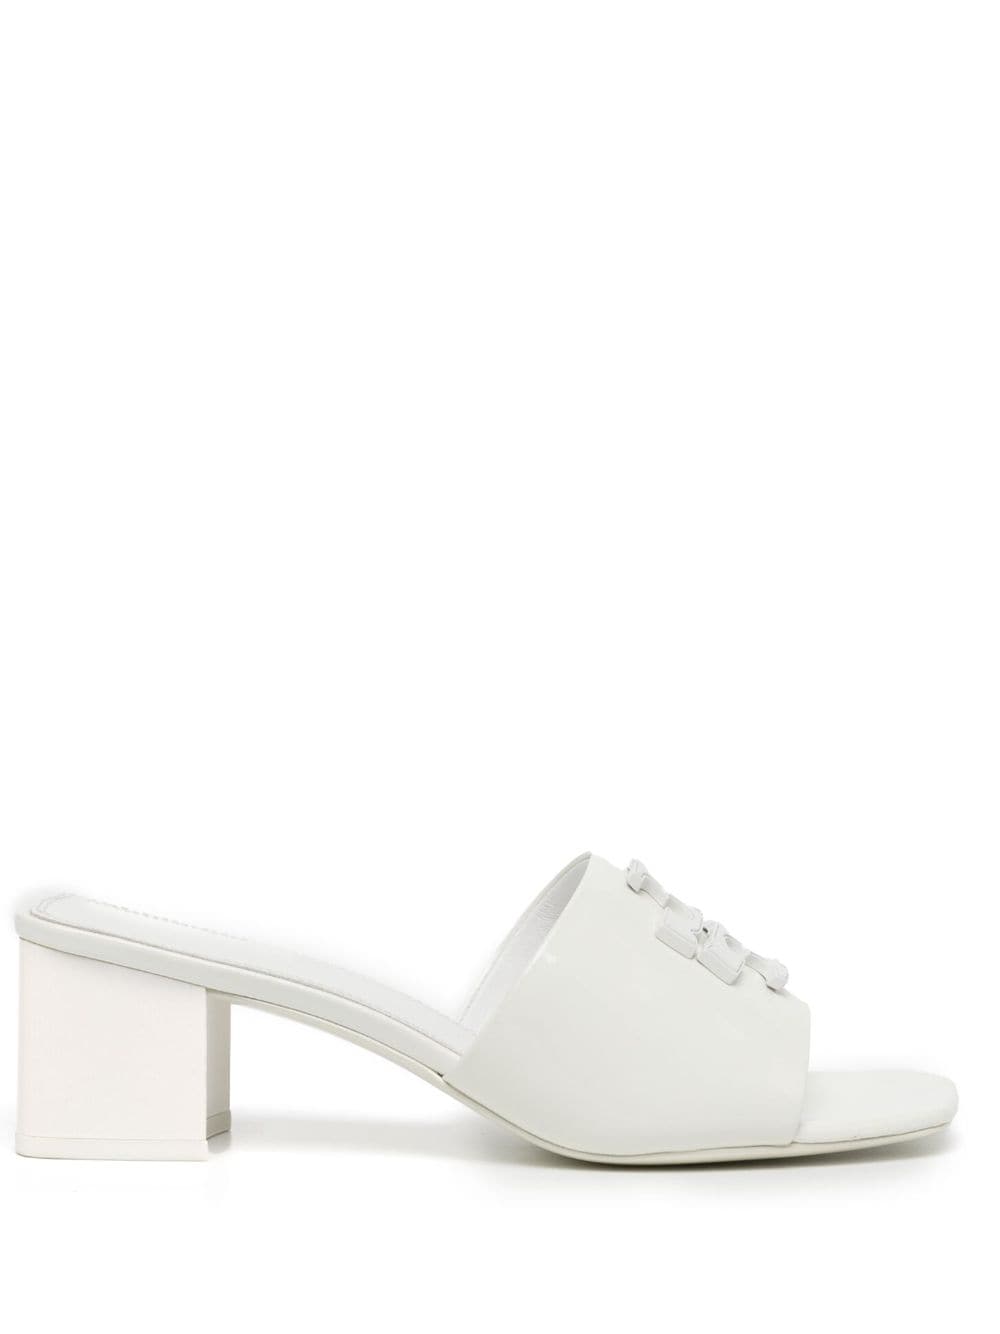 Tory Burch Eleanor 55mm Leather Mules In White